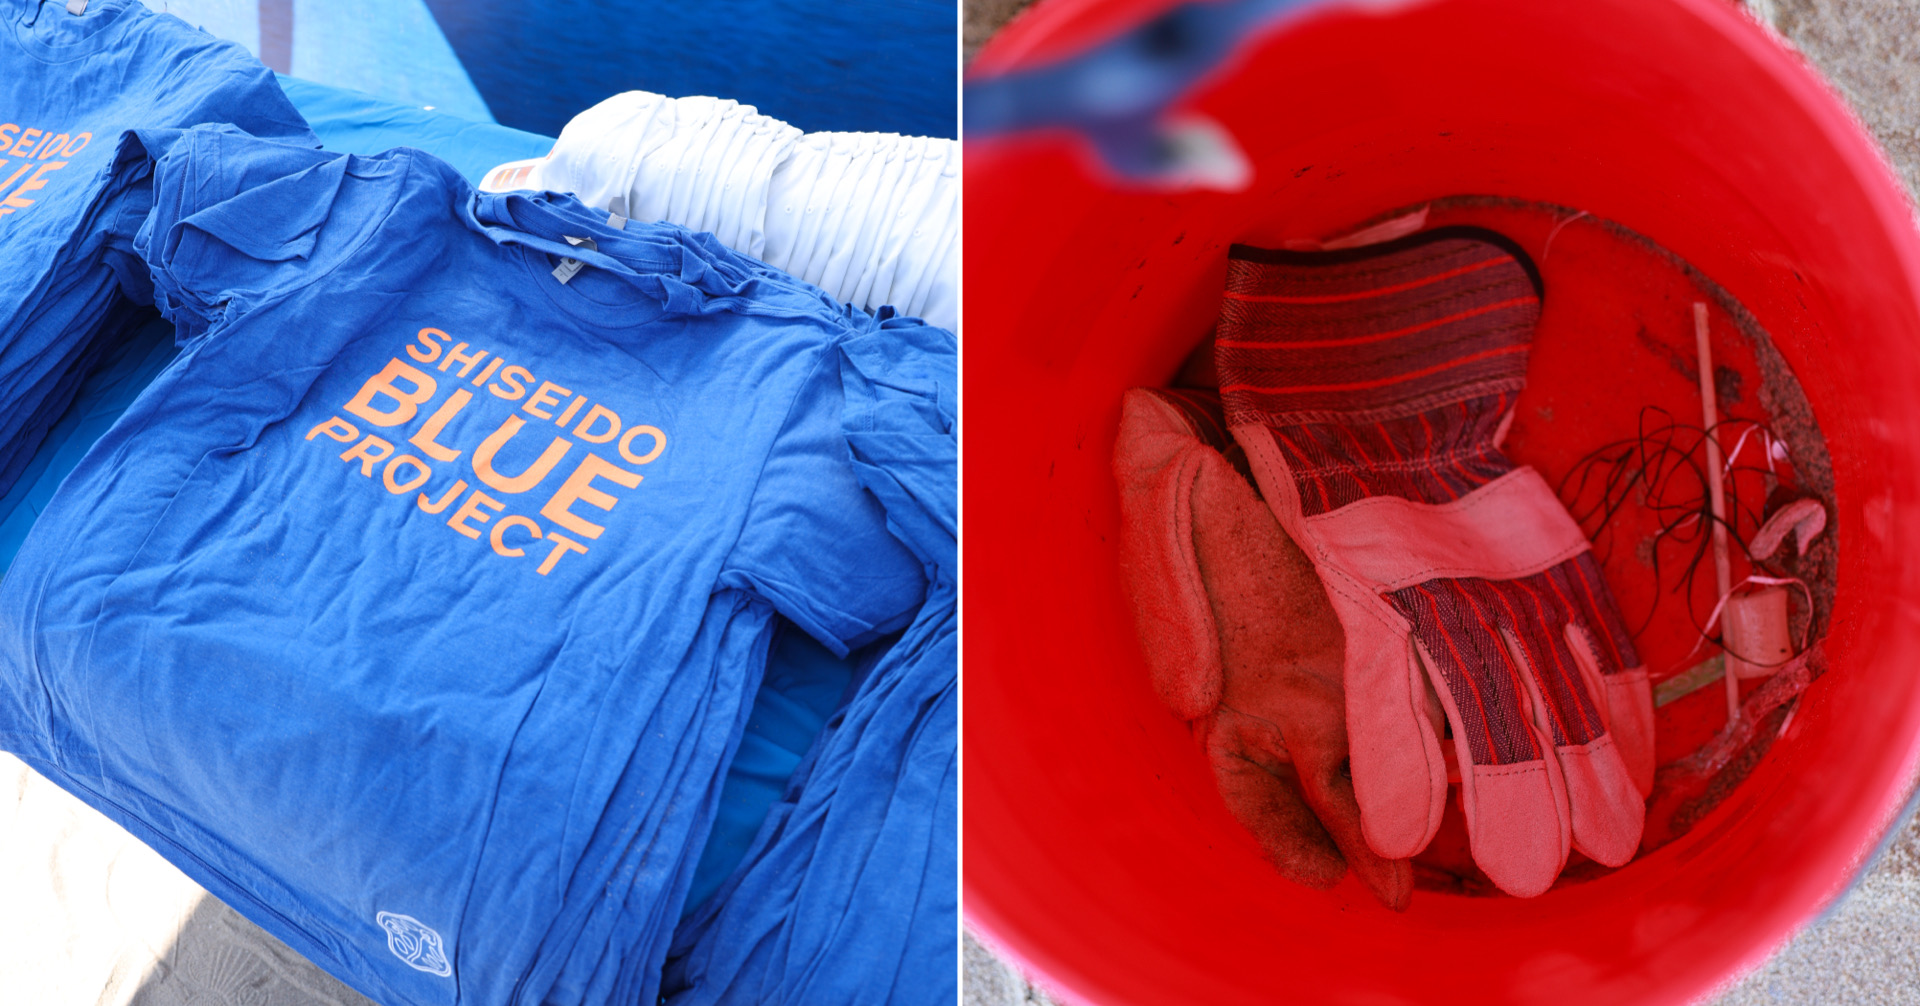 An image of the Shiseido Blue Project's shirts and clean-up gear.